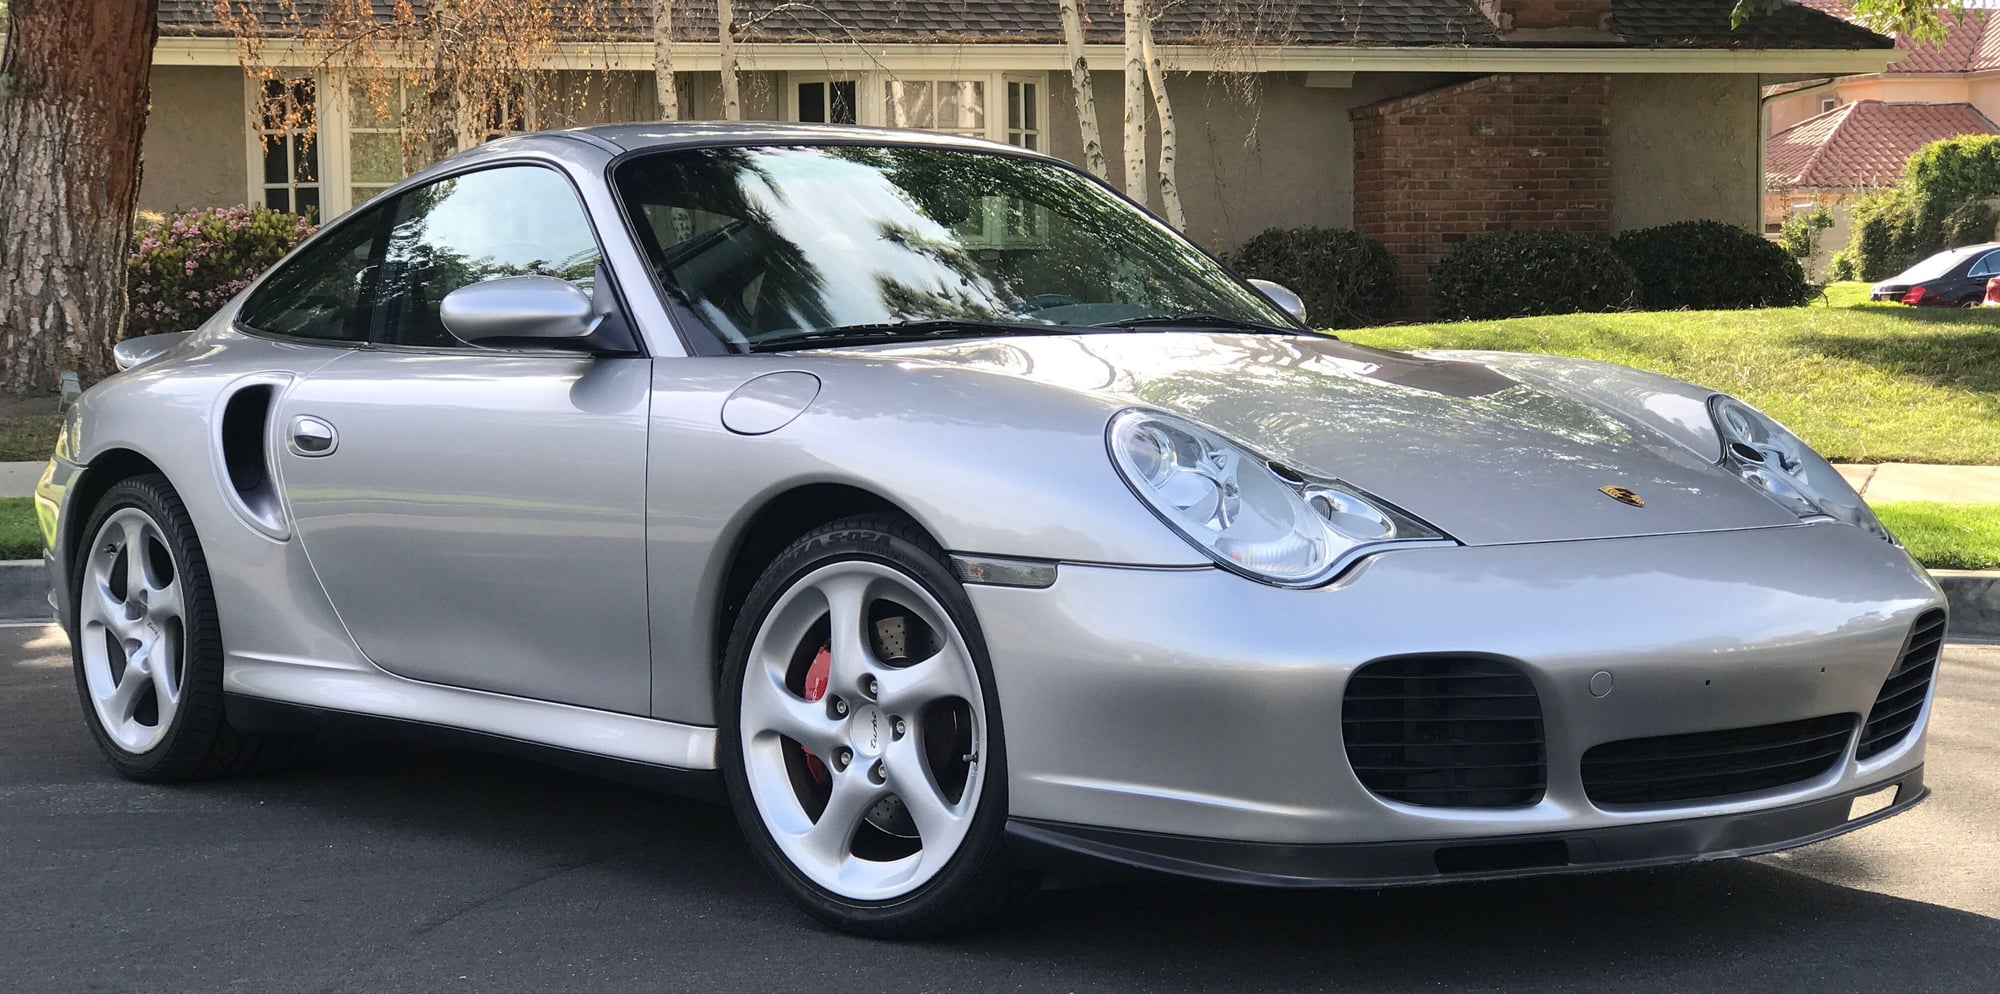 2002 Porsche 911 - 2002 Turbo, Arctic Silver/gray 6-speed 39K miles UNMOLESTED - Used - VIN WP0AB29922S686321 - 39,000 Miles - 6 cyl - AWD - Manual - Coupe - Silver - Los Angeles, CA 91356, United States